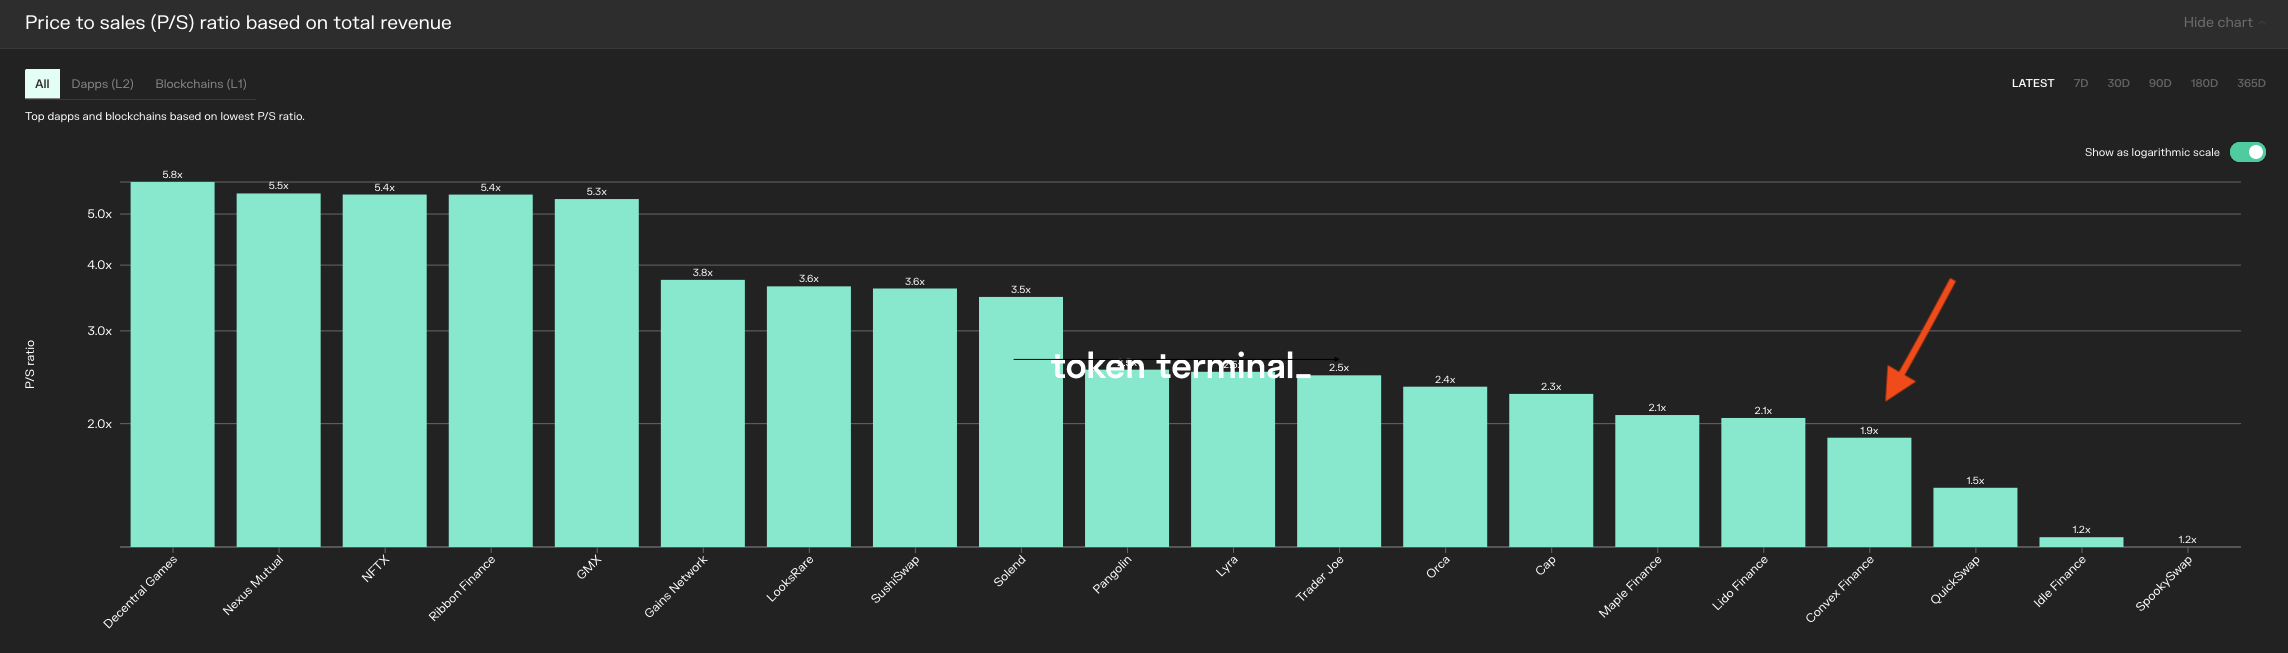 Convex’s P/S Ratio relative to other dapps (Source: Token Terminal)